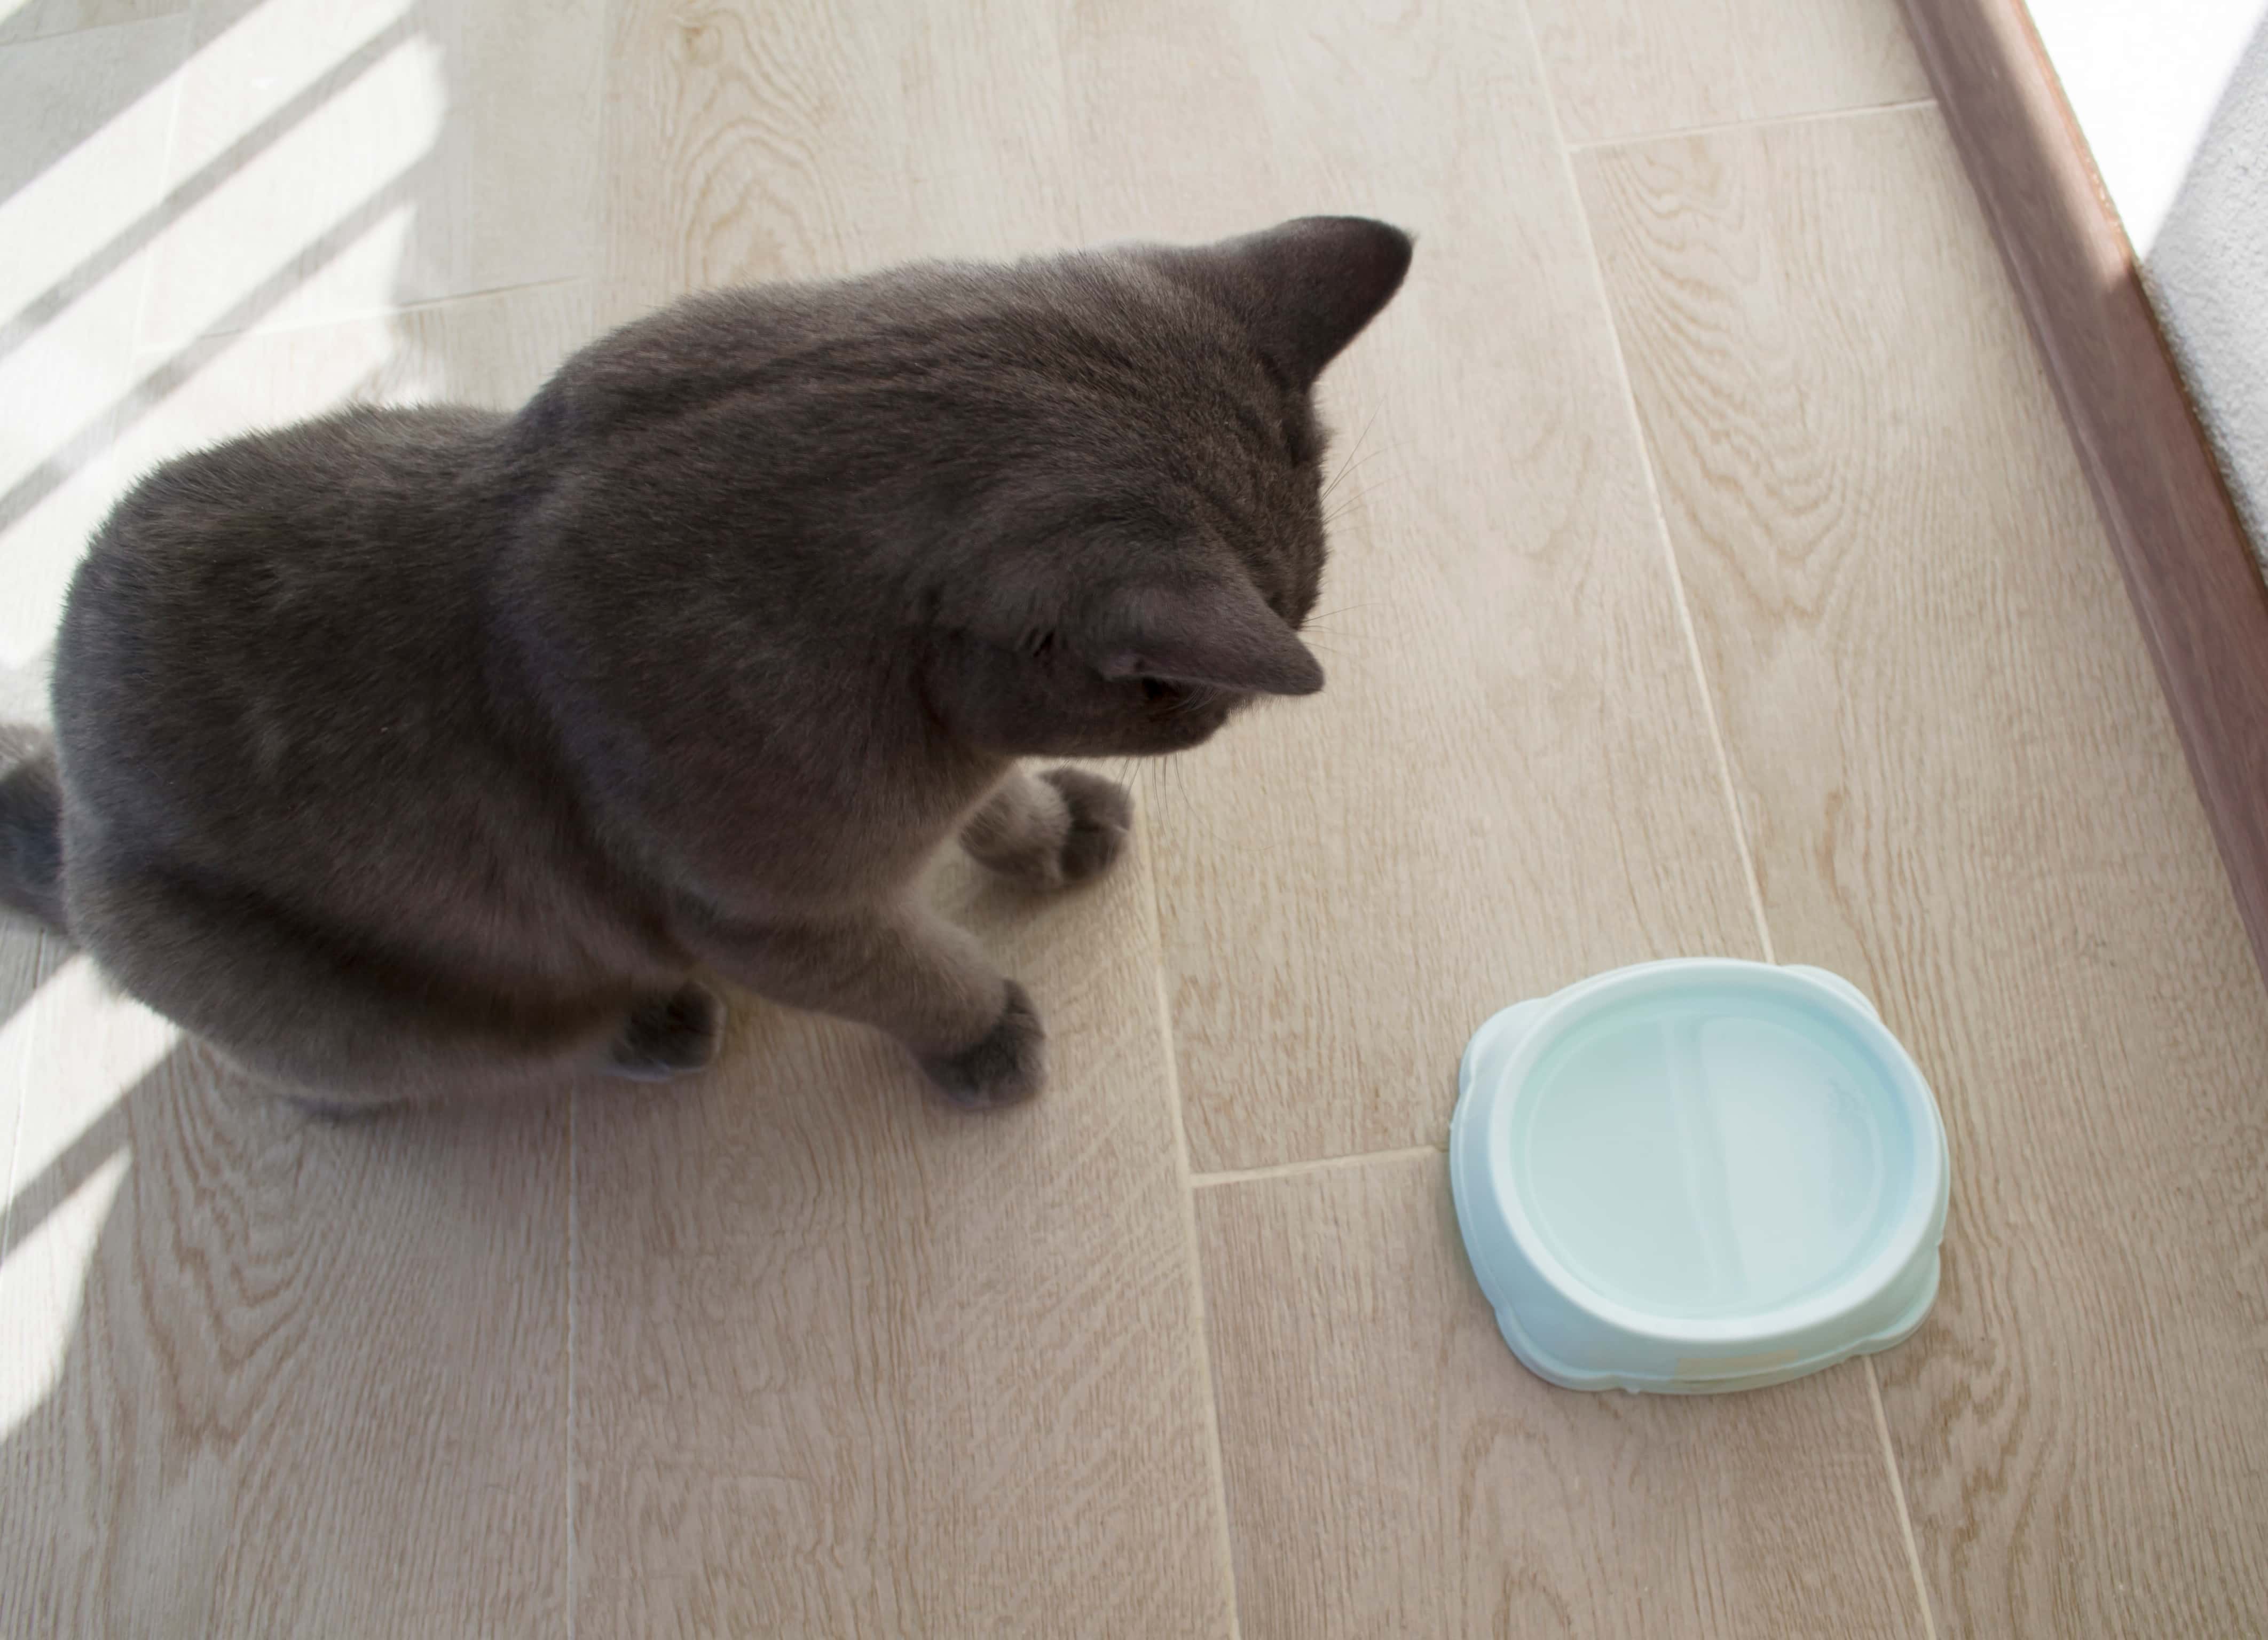 British cat and bowl. The cat sits next to a blue bowl of water on the floor